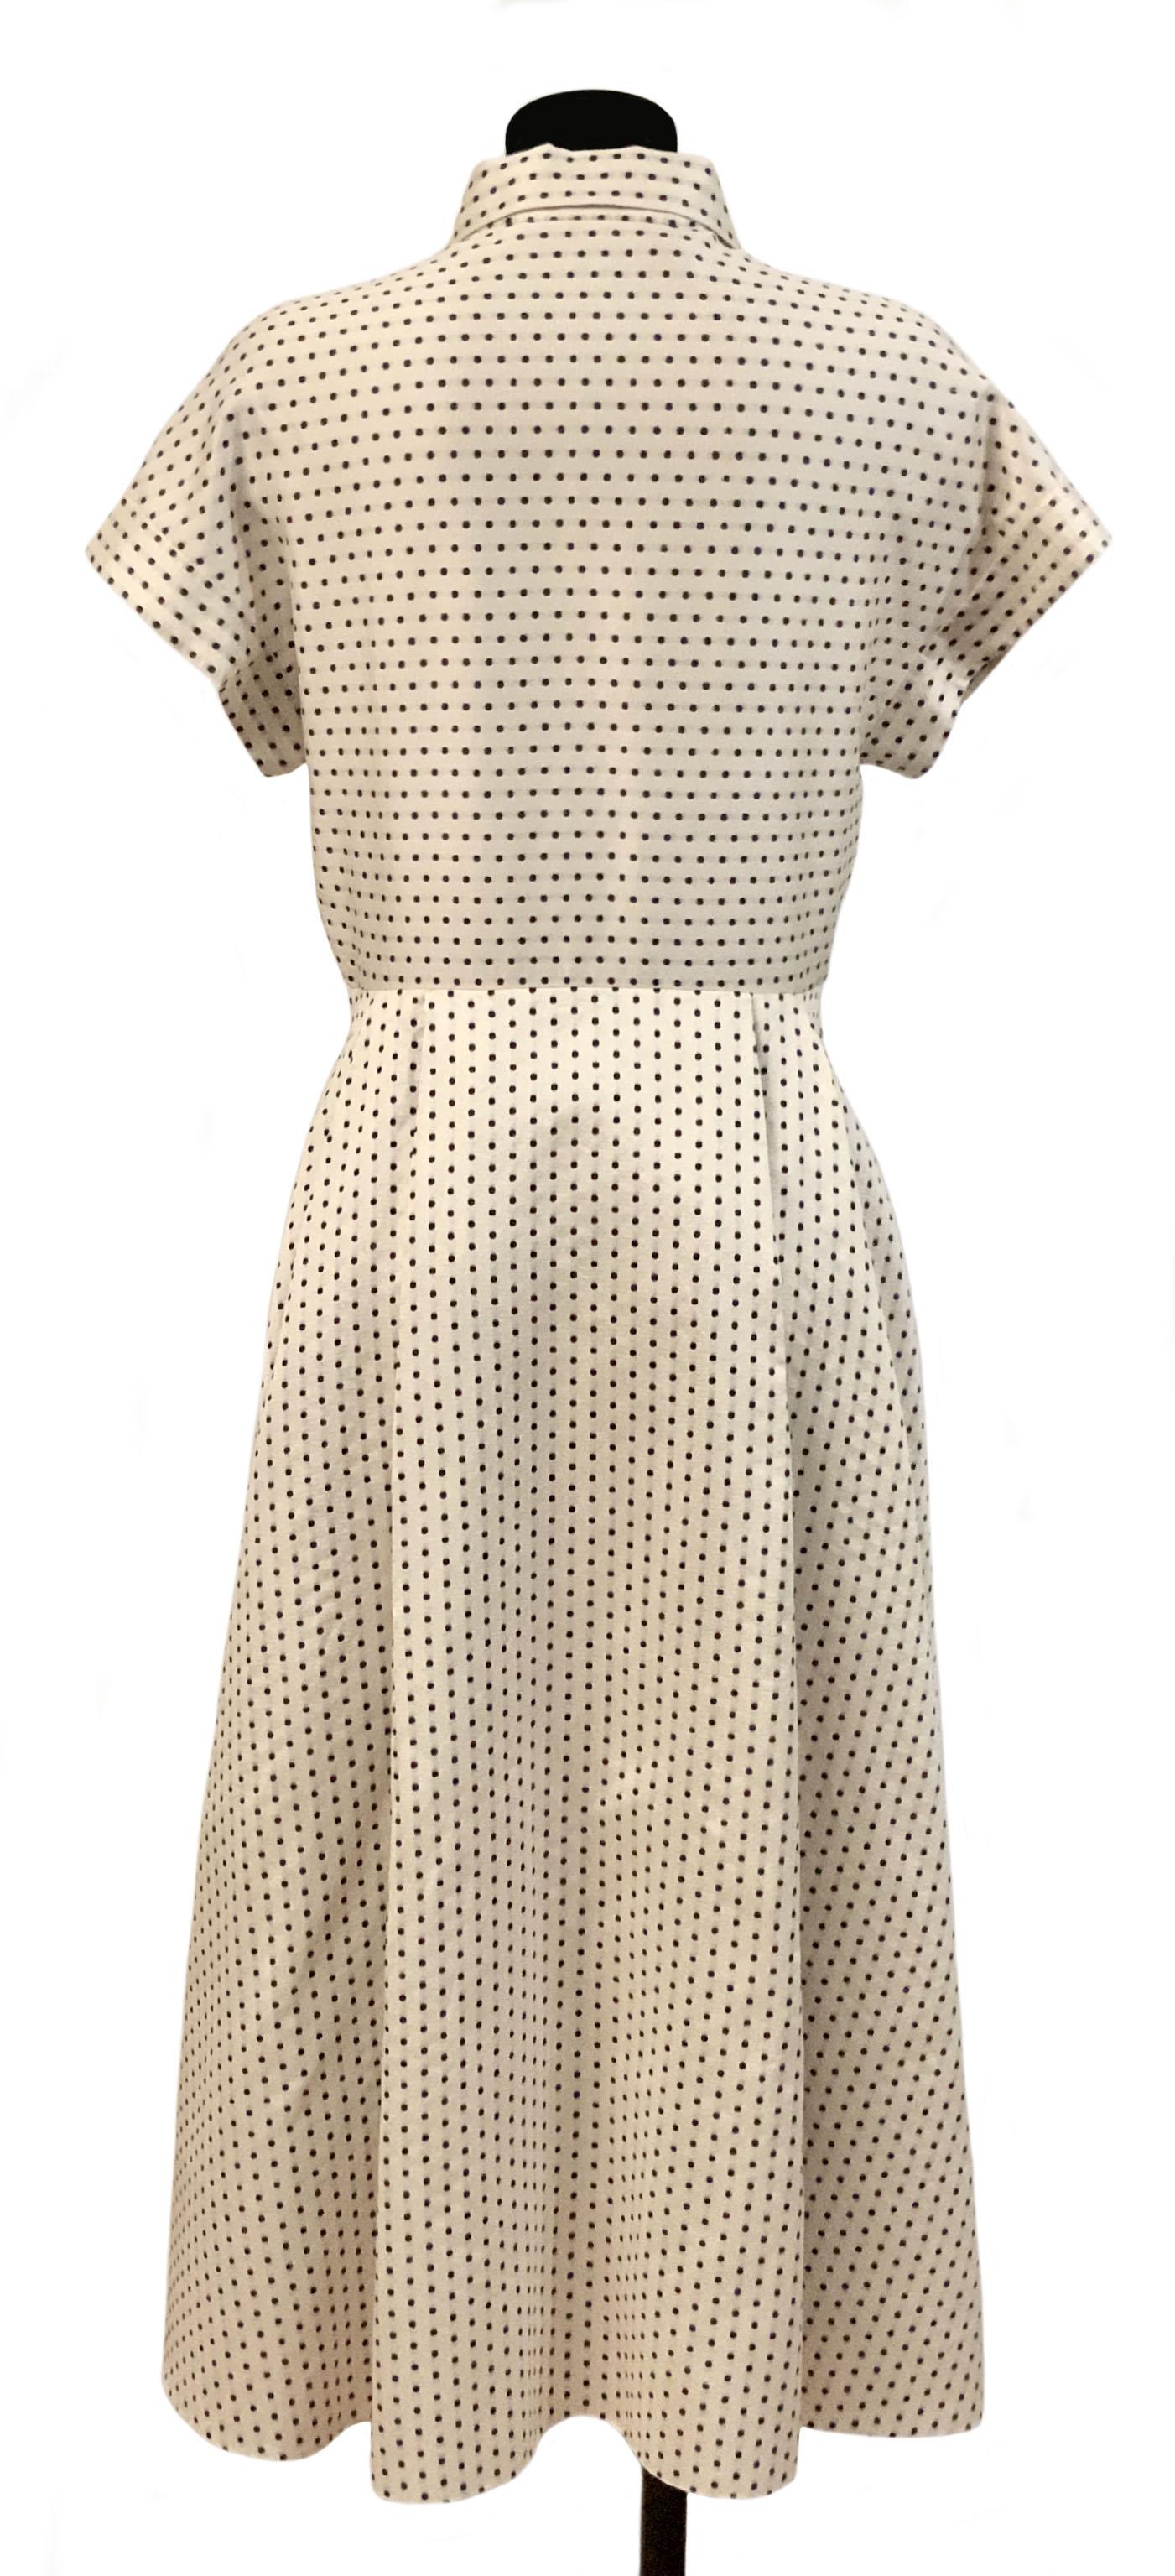 Beautiful dress from the Pre-Fall Collection 2020 from the house of Christian Dior.
Its is crafted from light silk and cotton jacquard in a soft ivory color with black polka dots.

It features a shirt type collar, short sleeves and front button